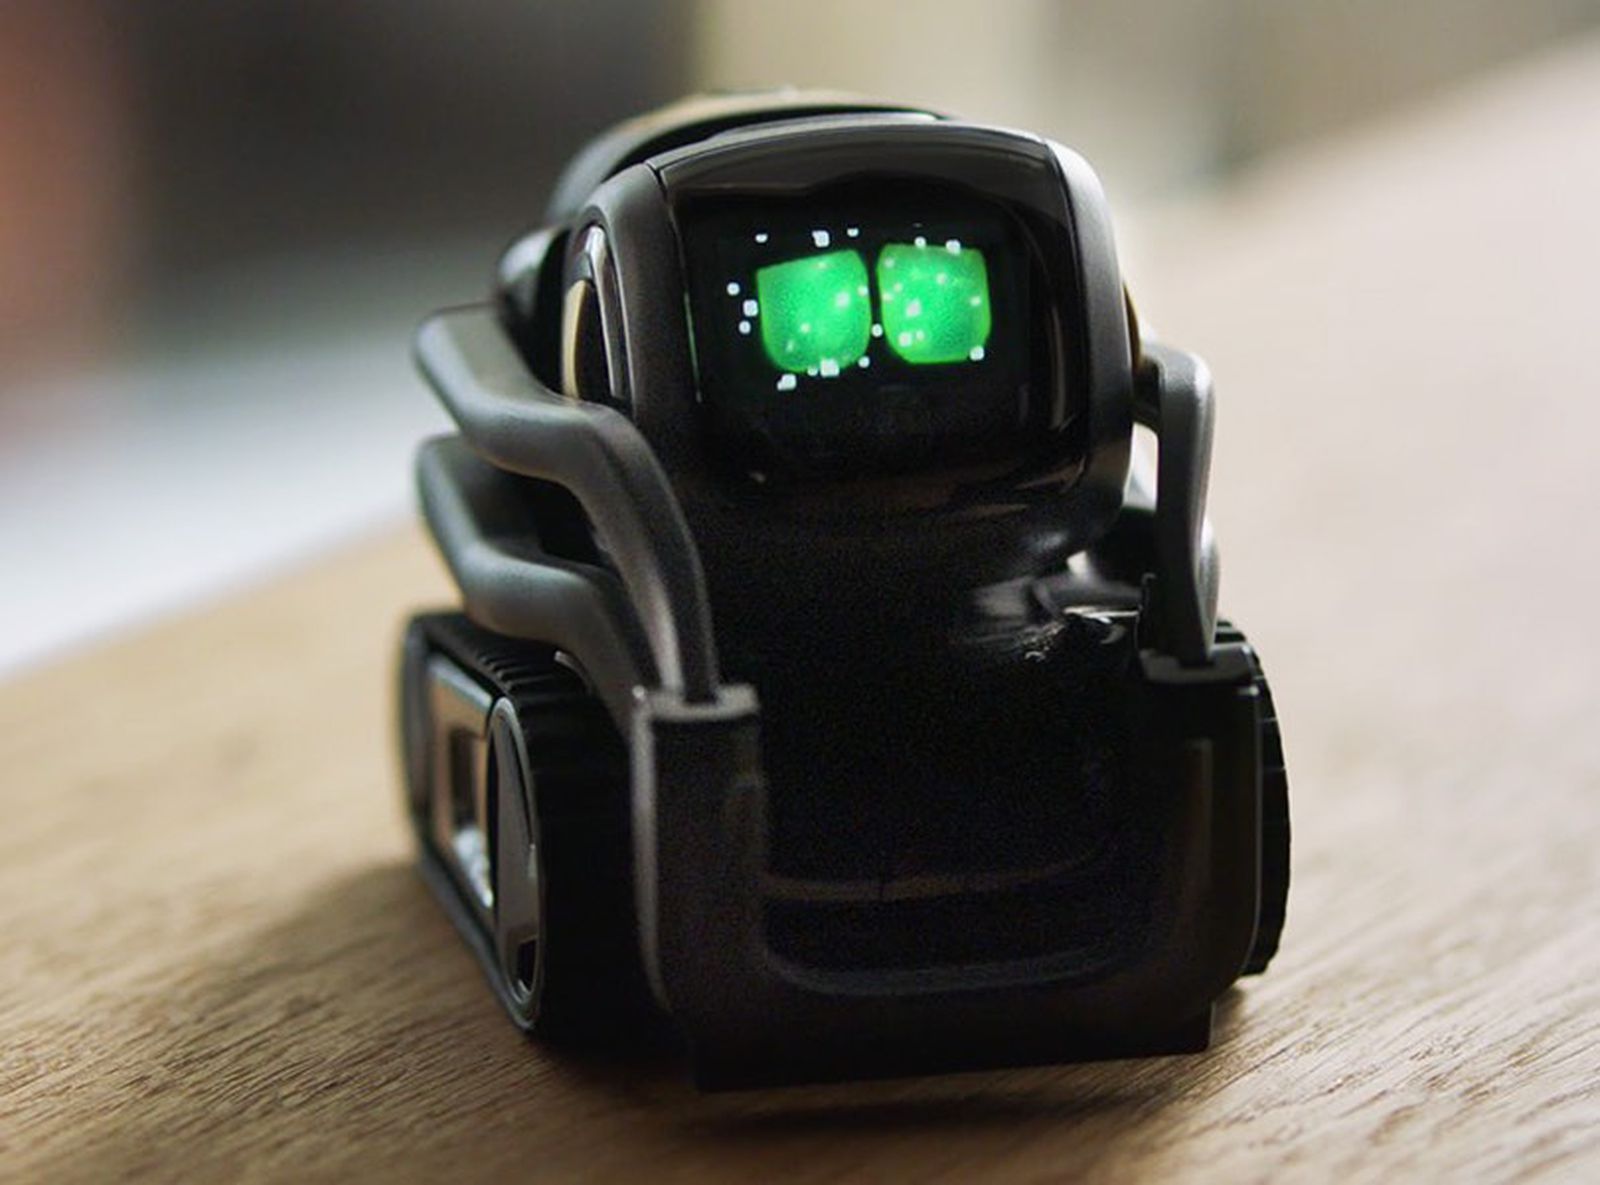 Review: Anki's Vector Robot Isn't the Smartest AI, but He's Definitely the Most Adorable